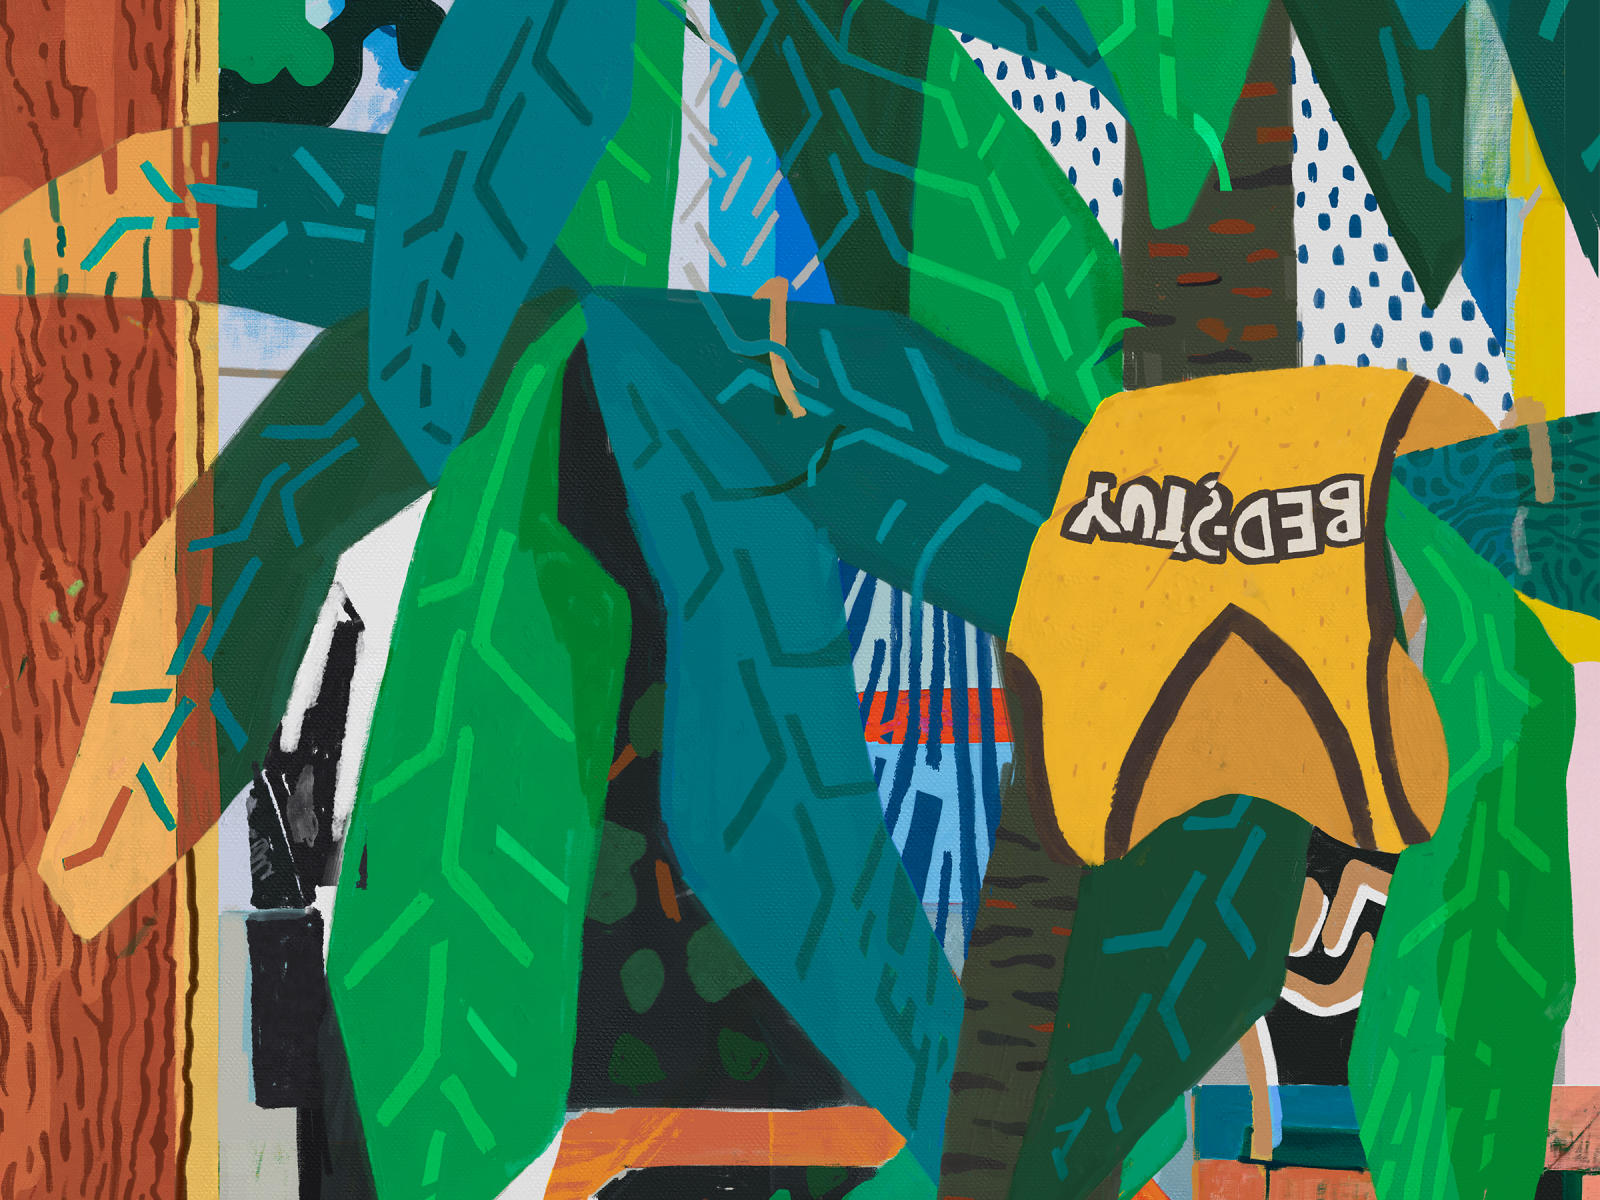 Detail of artwork depicting Brooklyn Nets uniforms and plants.